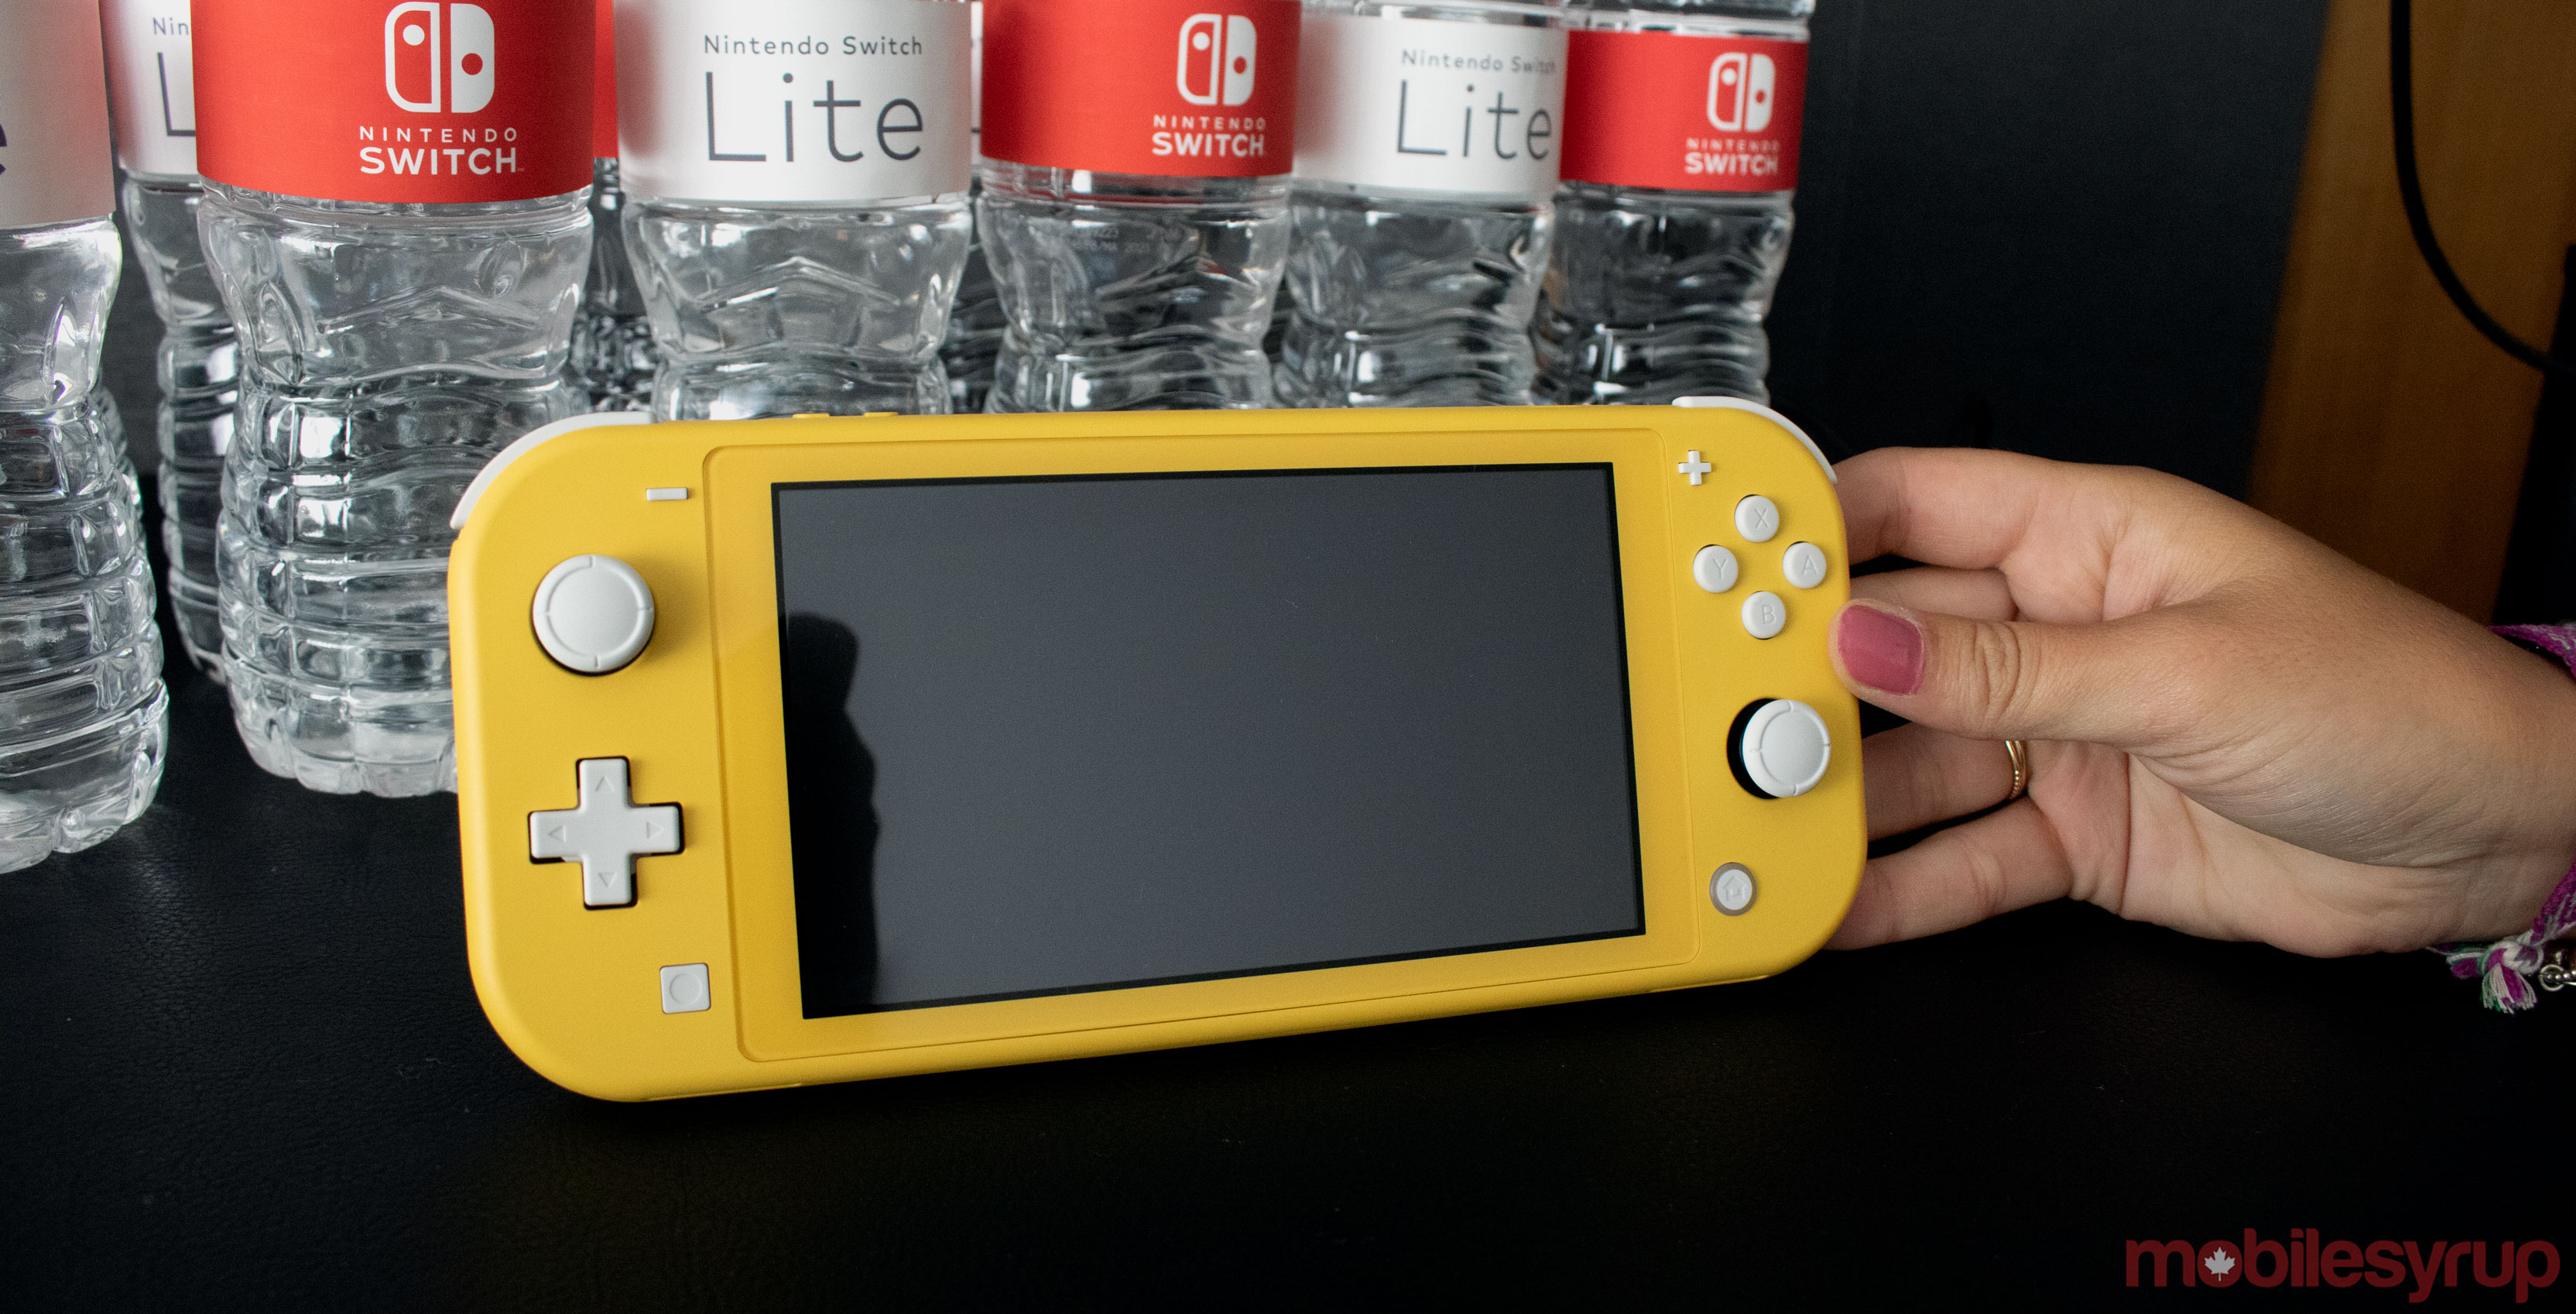 Nintendo Says 30 Percent Of Switch Lite Buyers Already Owned A Switch